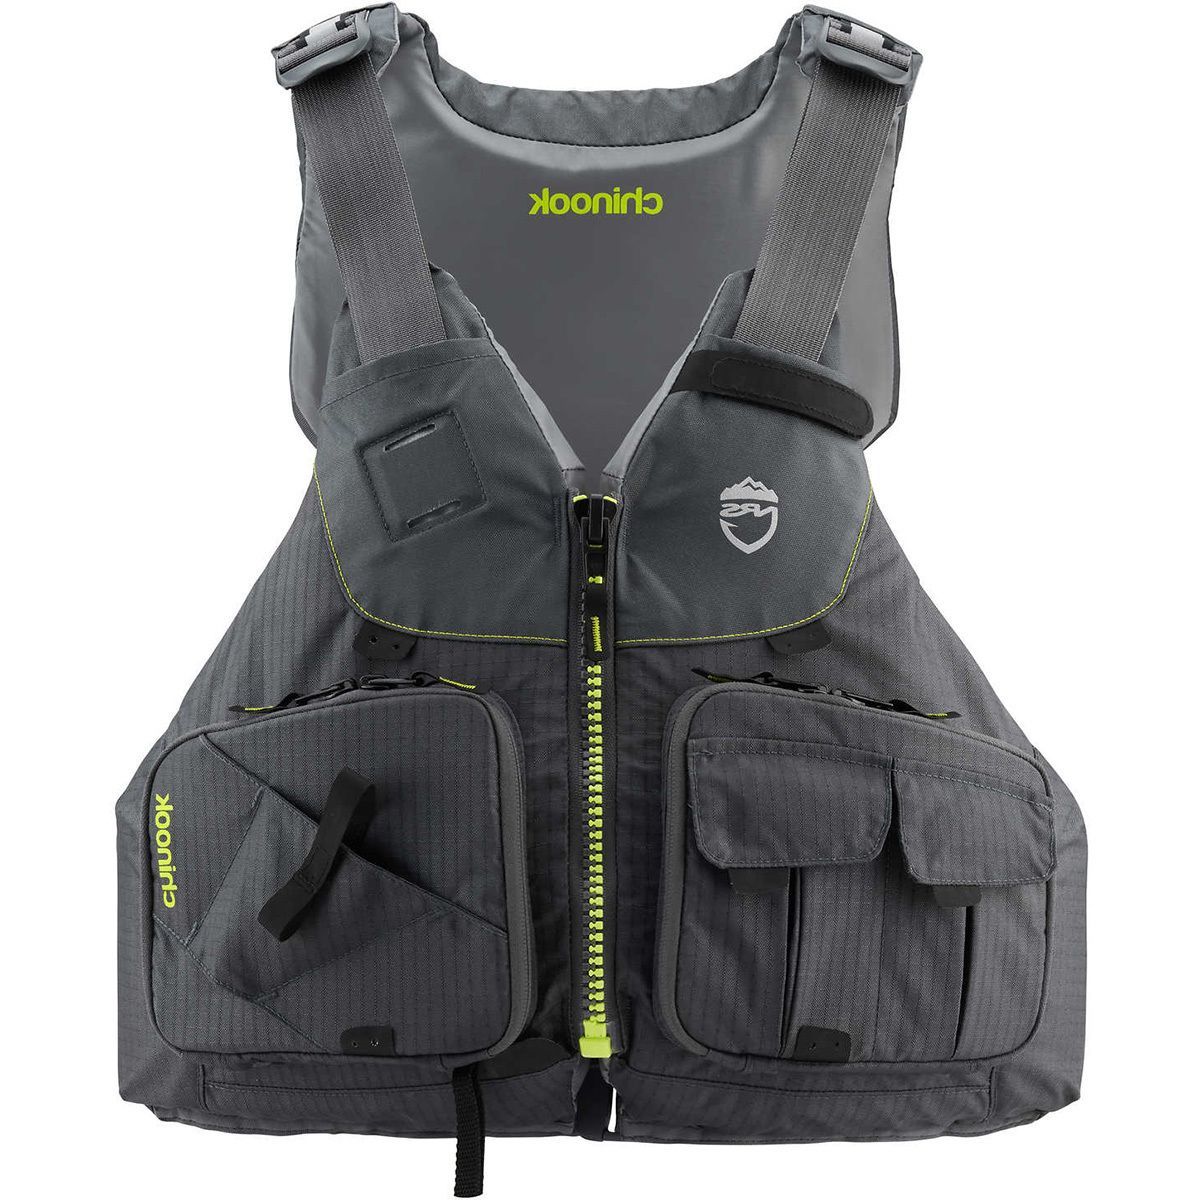 NRS Chinook Personal Flotation Device - Men's